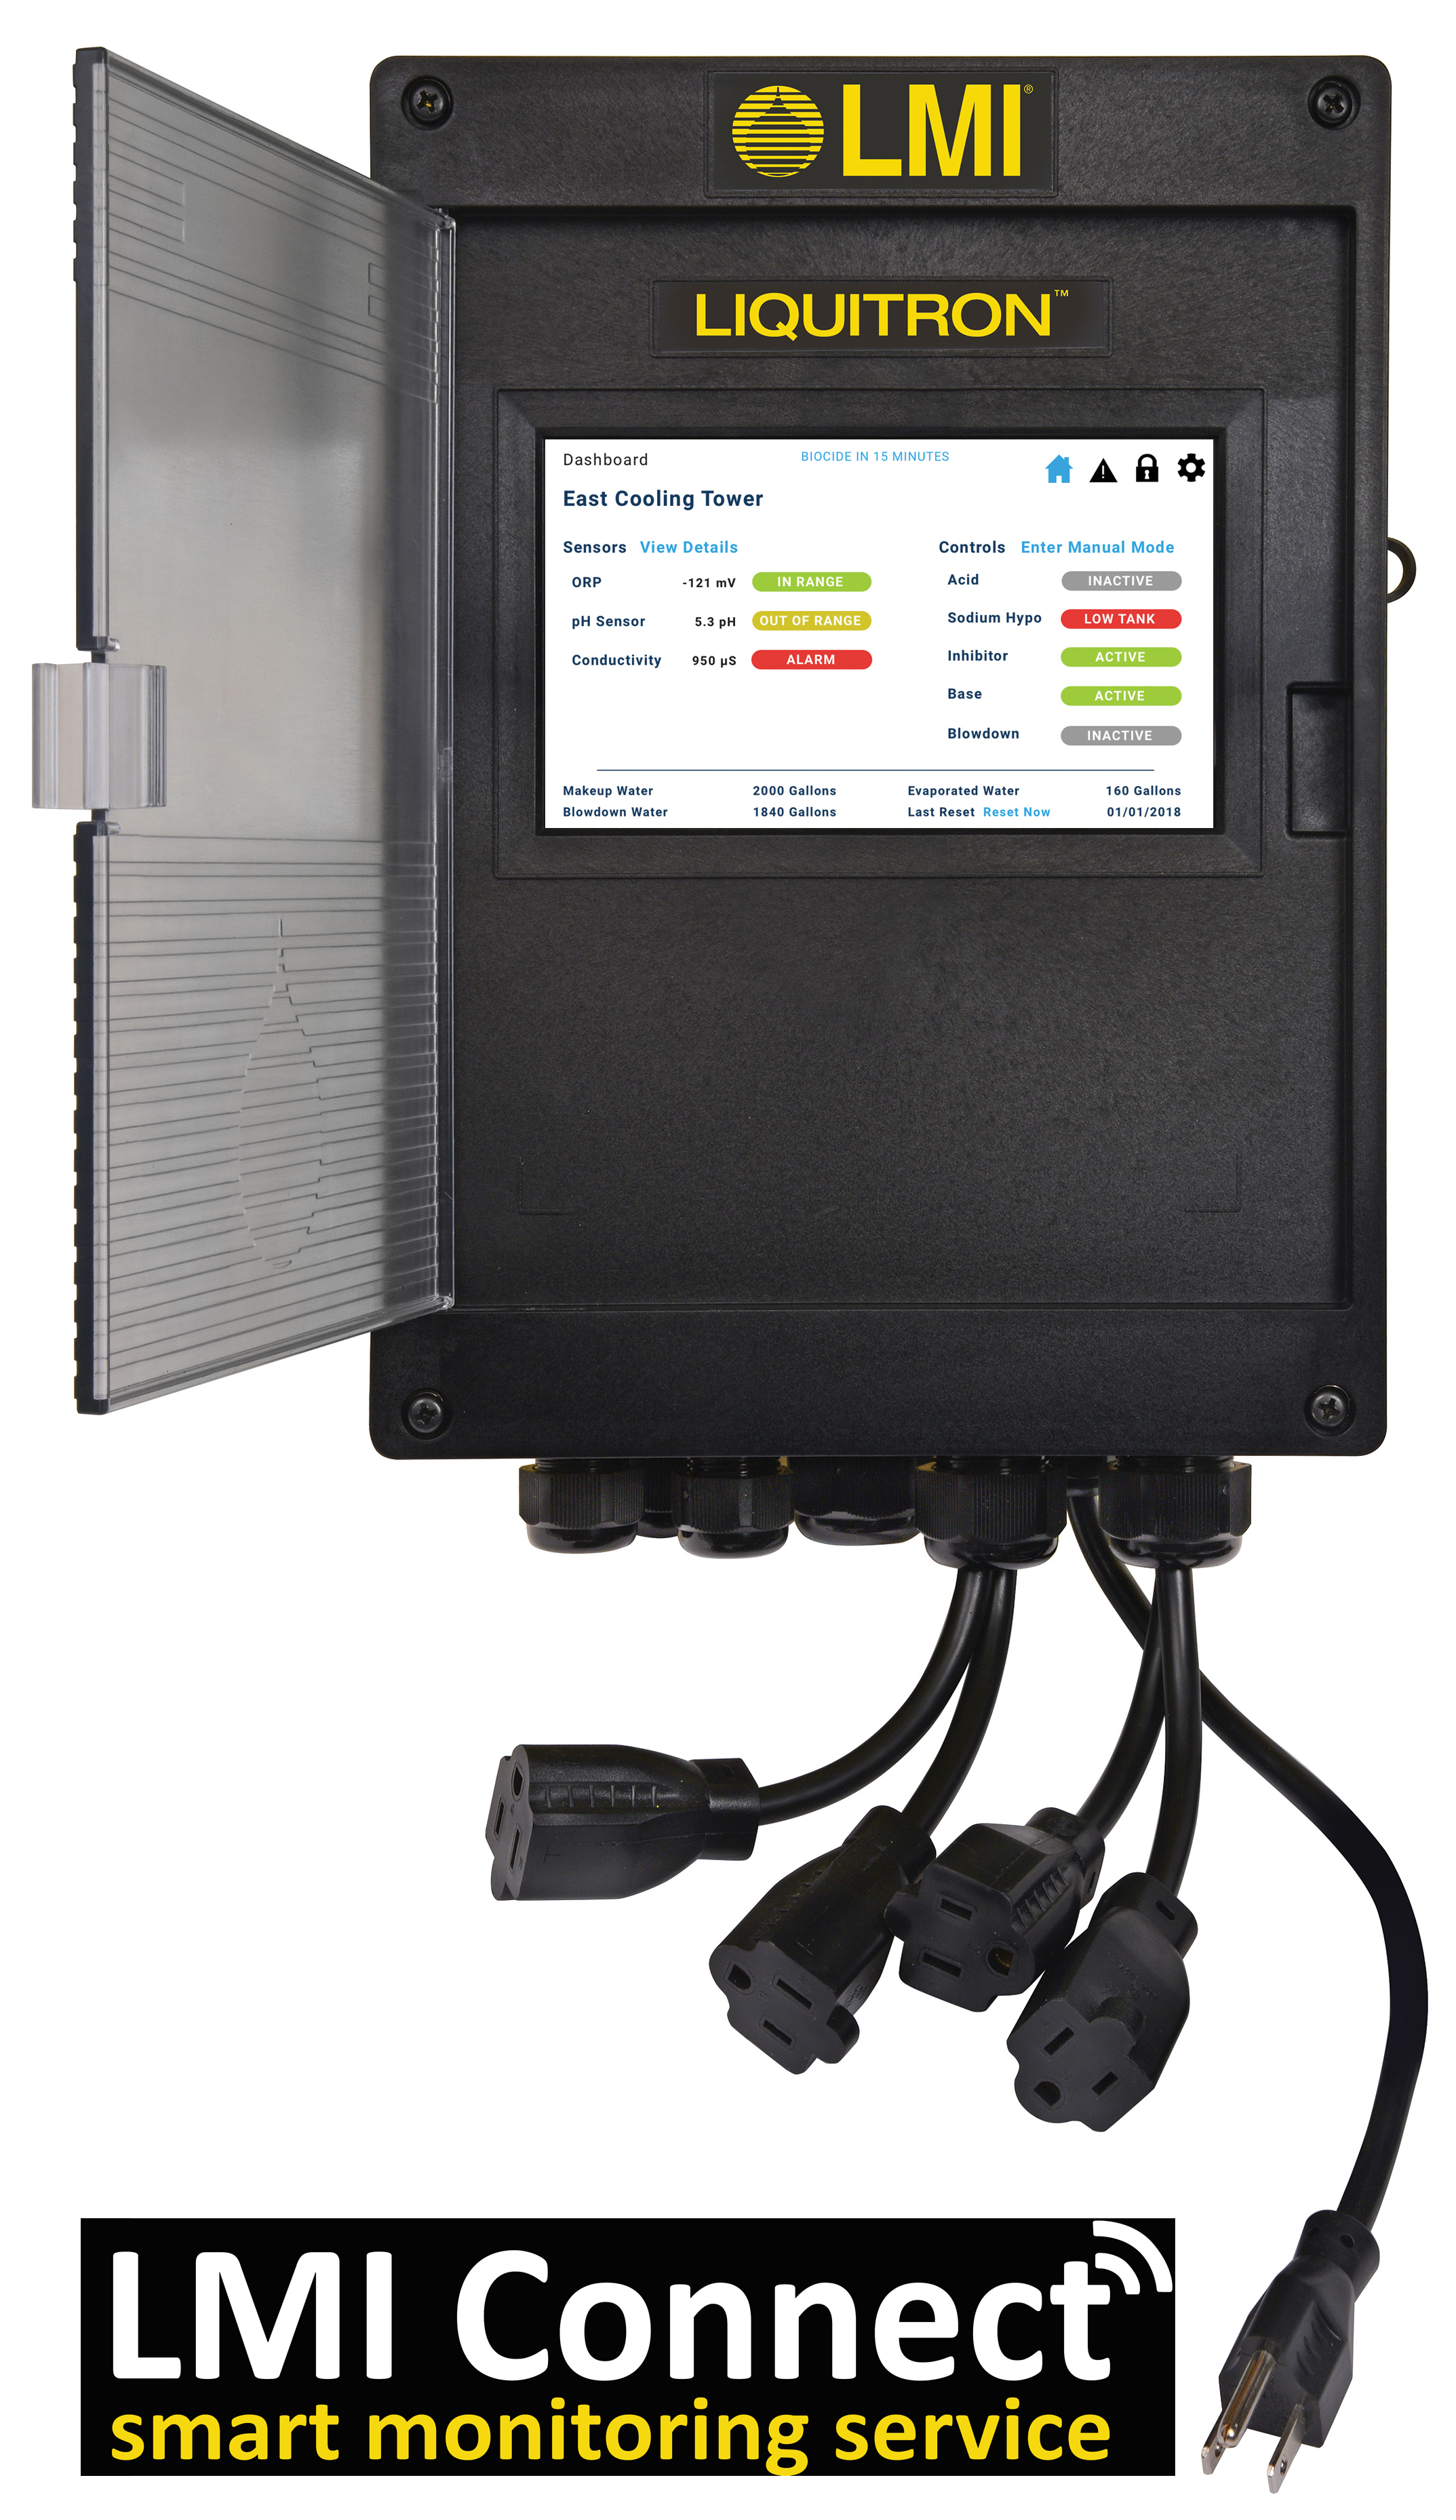 The cloud-based LMI Connect smart monitoring service for water treatment applications.